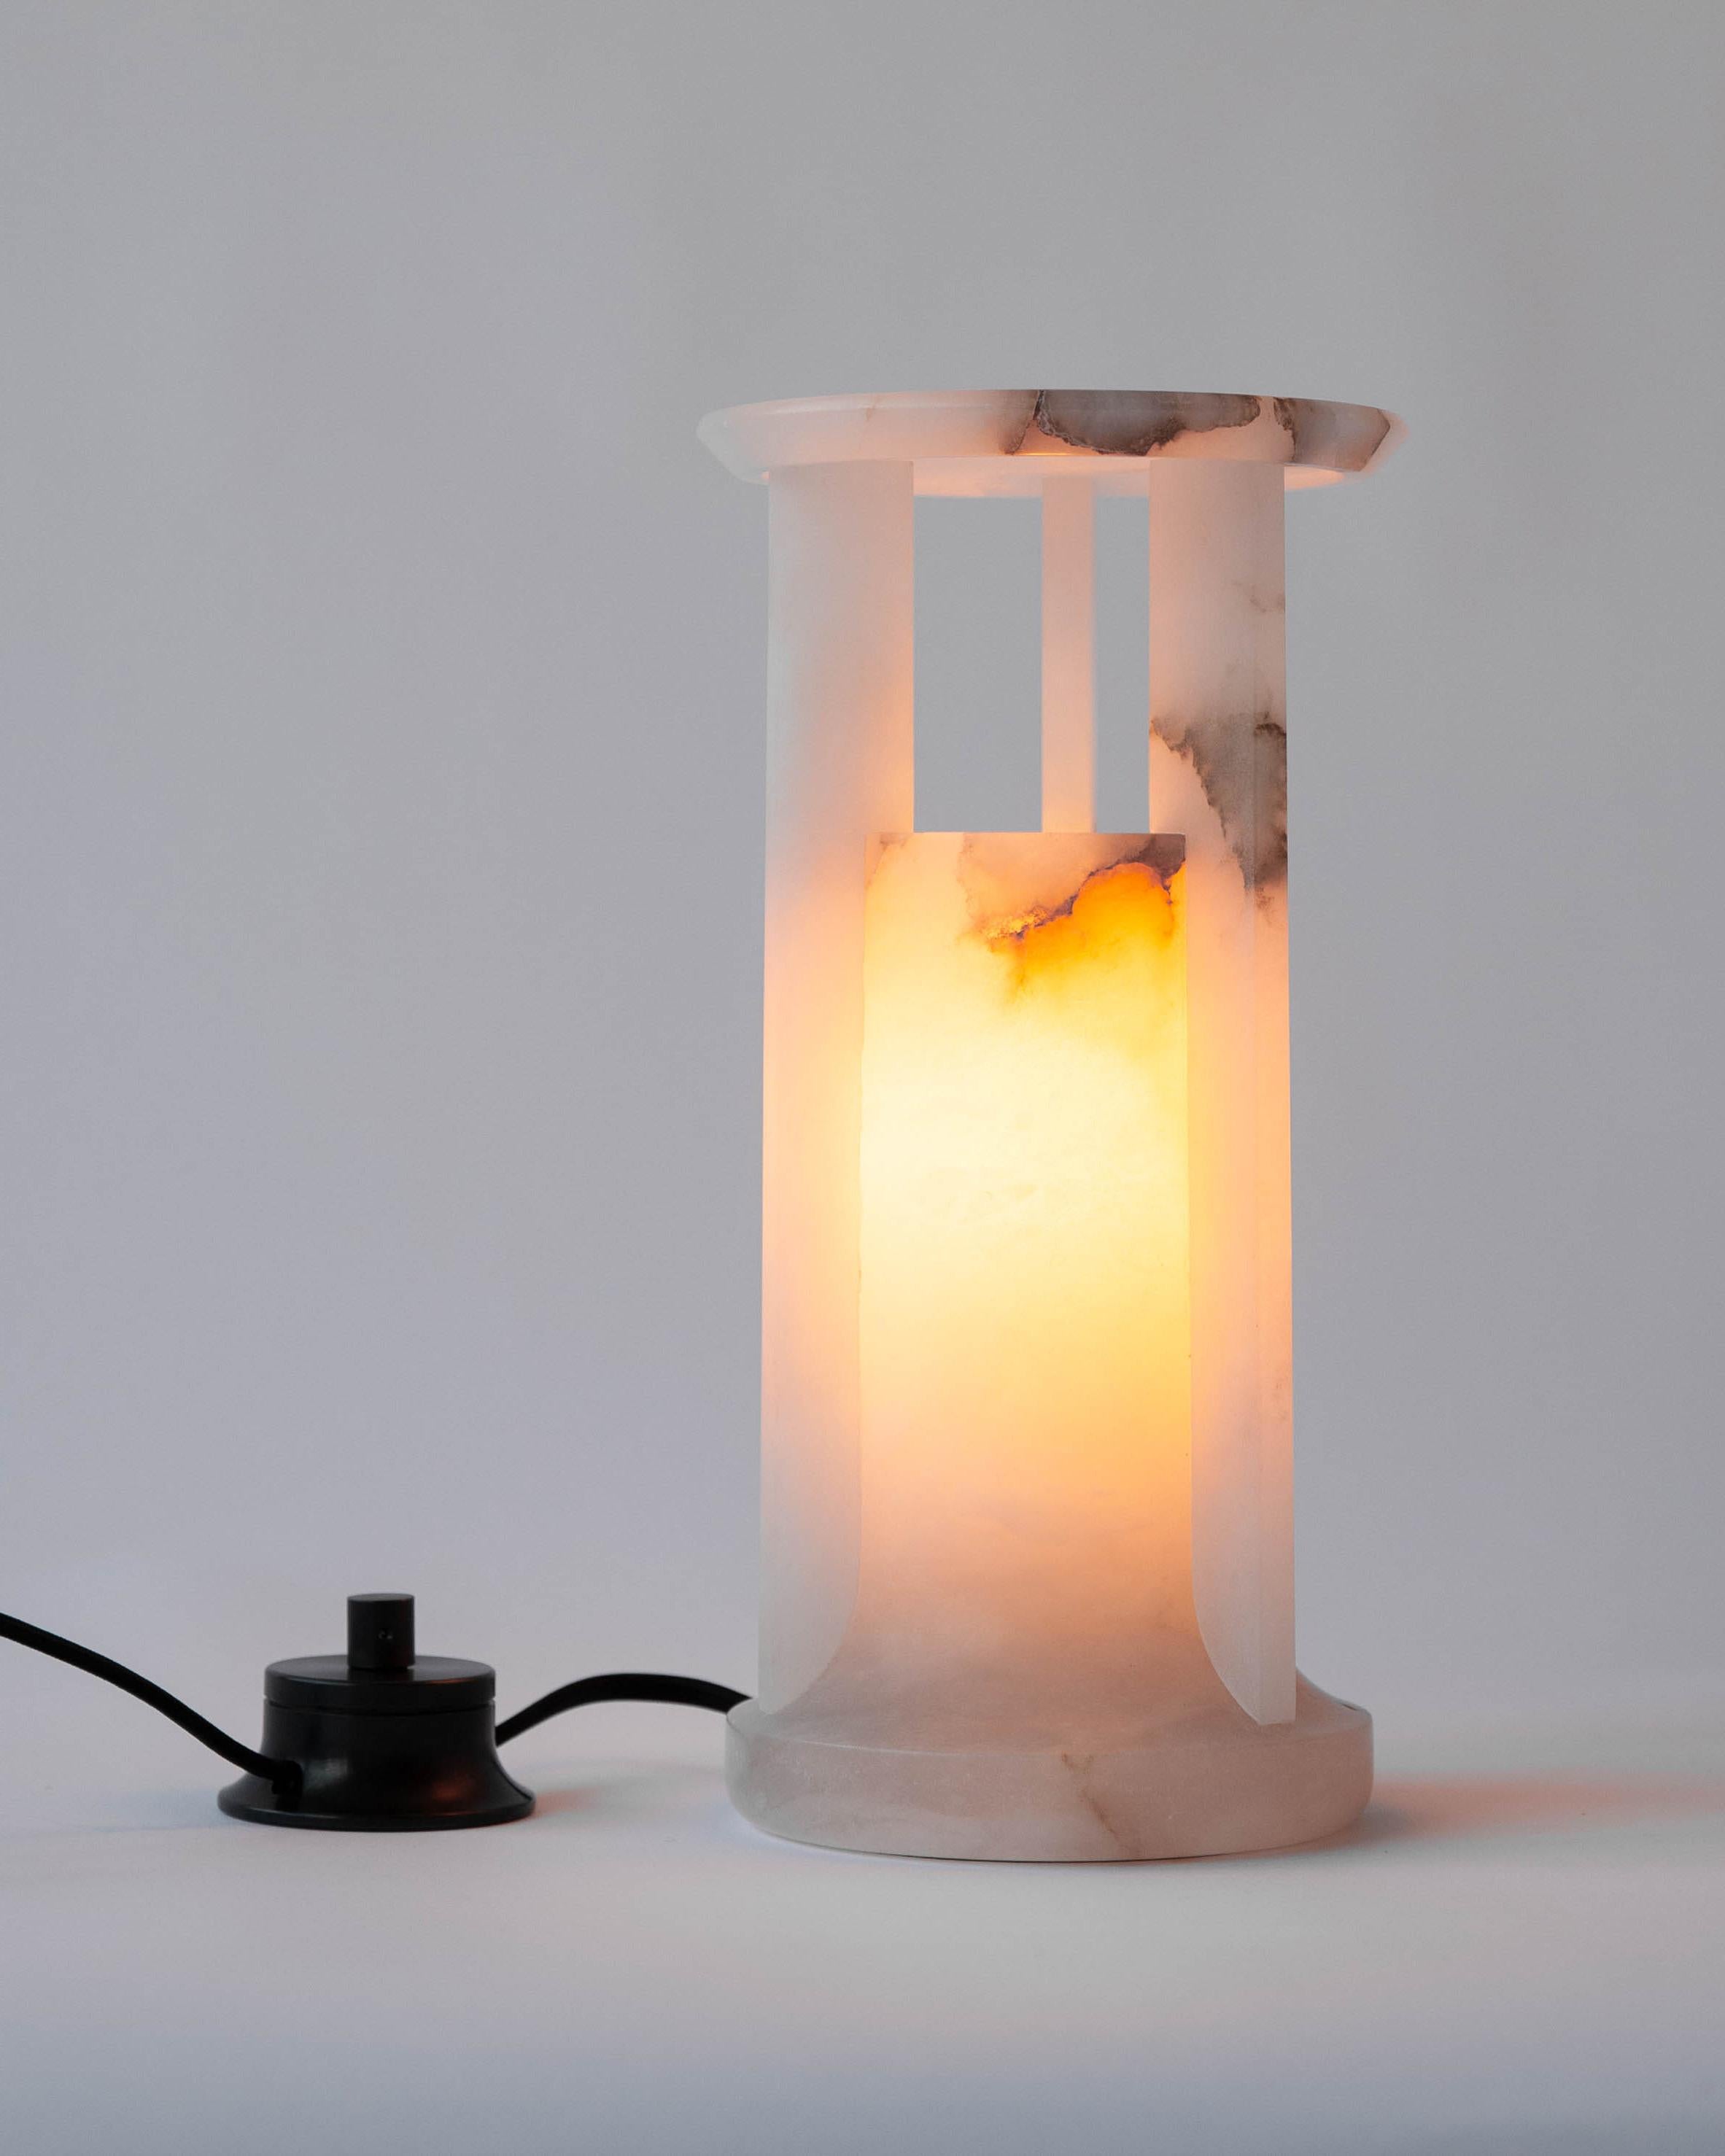 MTL4500
A hand-carved, veined white alabaster table lantern in a tempietto form with a pierced capital, supporting a broad top lens. Fitted with a heavy brass rotary dimming switch and an E12 LED lamp that emits a warm glow through the stone body.